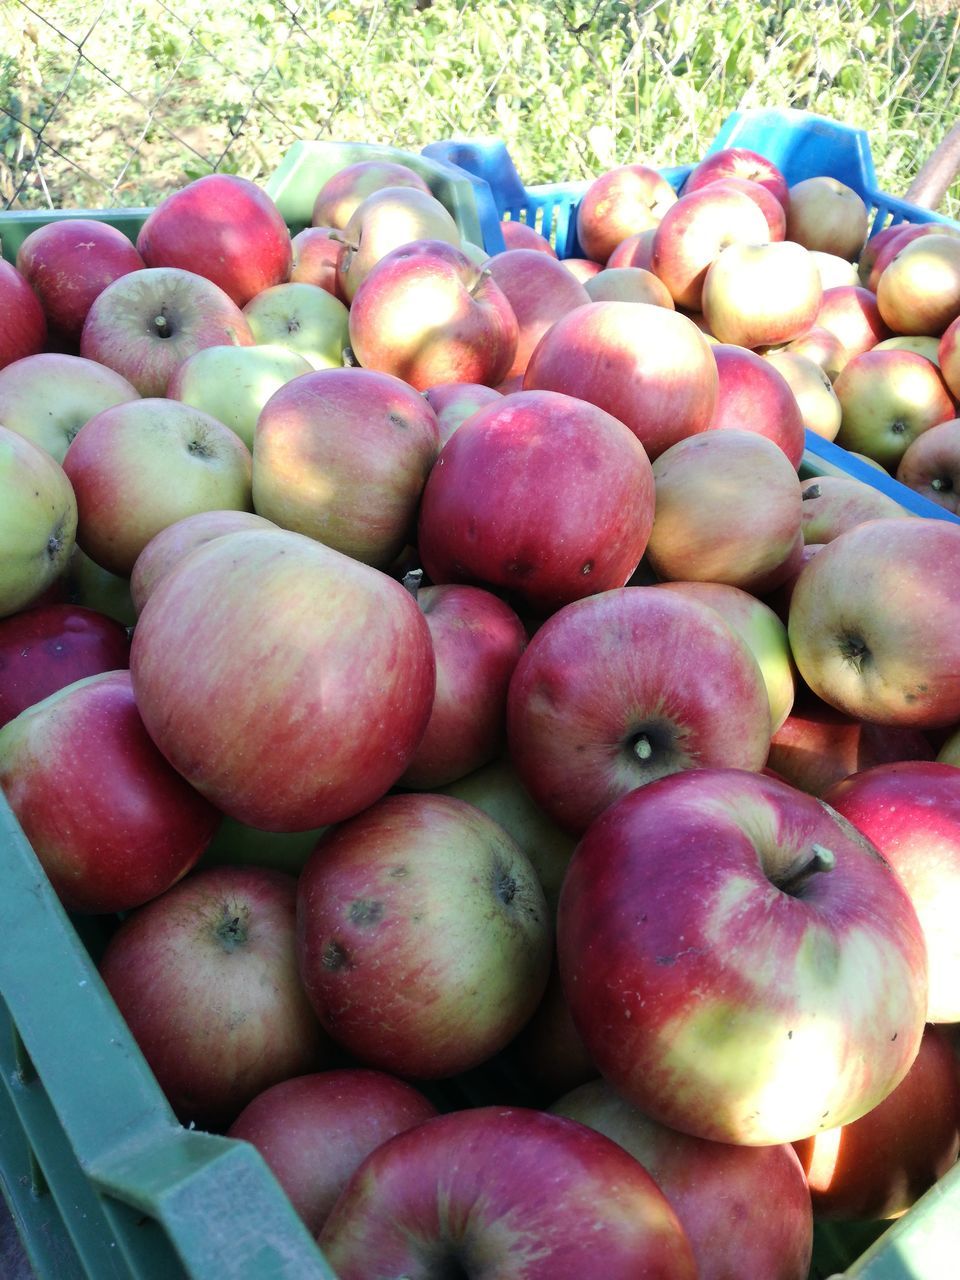 HIGH ANGLE VIEW OF APPLES AT MARKET STALL